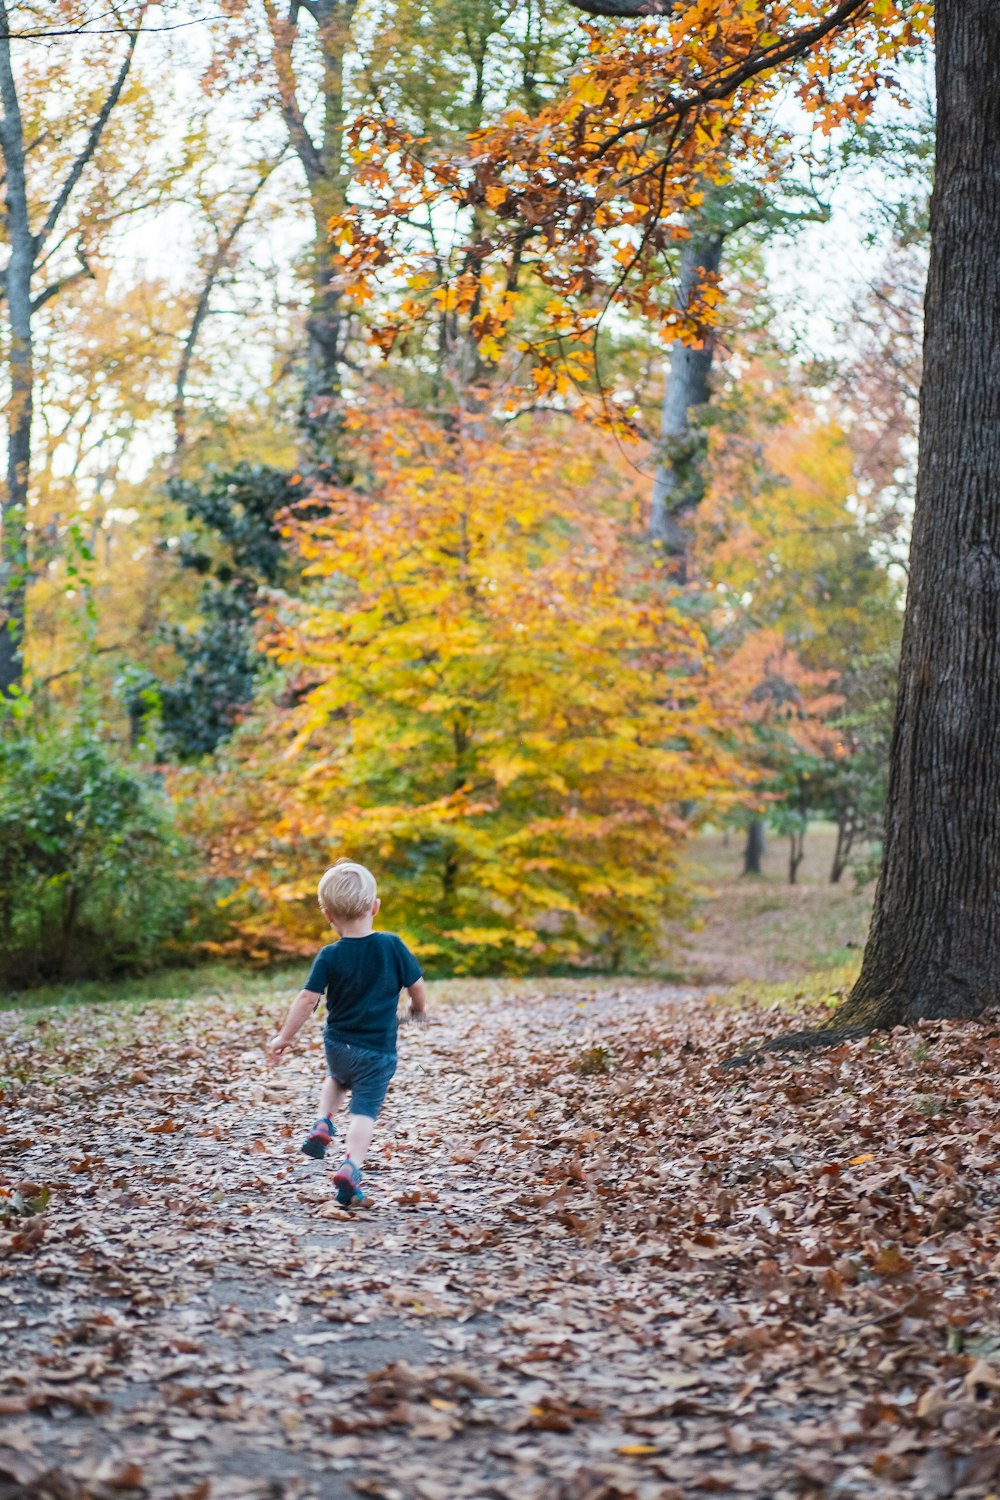 child in blue jacket walking on brown leaves on ground surrounded by trees during daytime